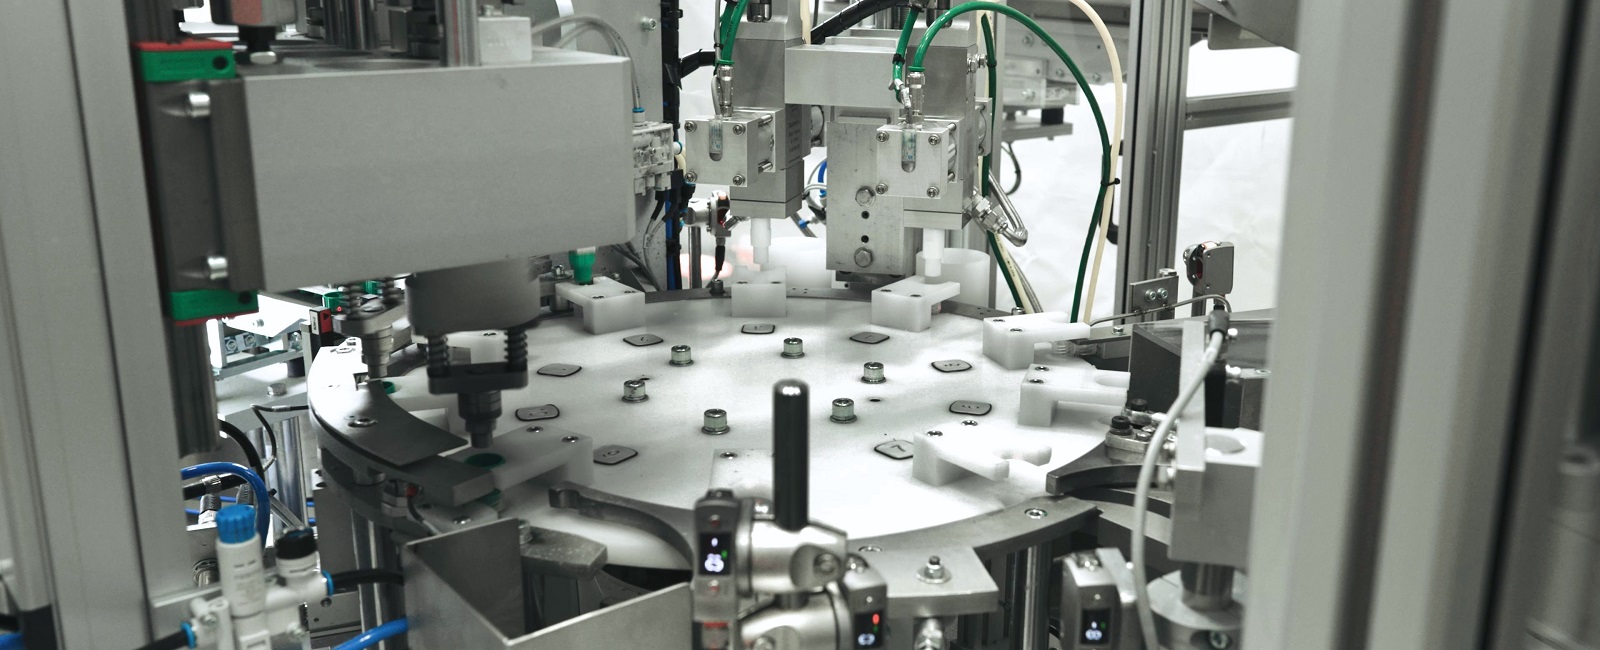 Automated Vial Filling and Labelling Machine